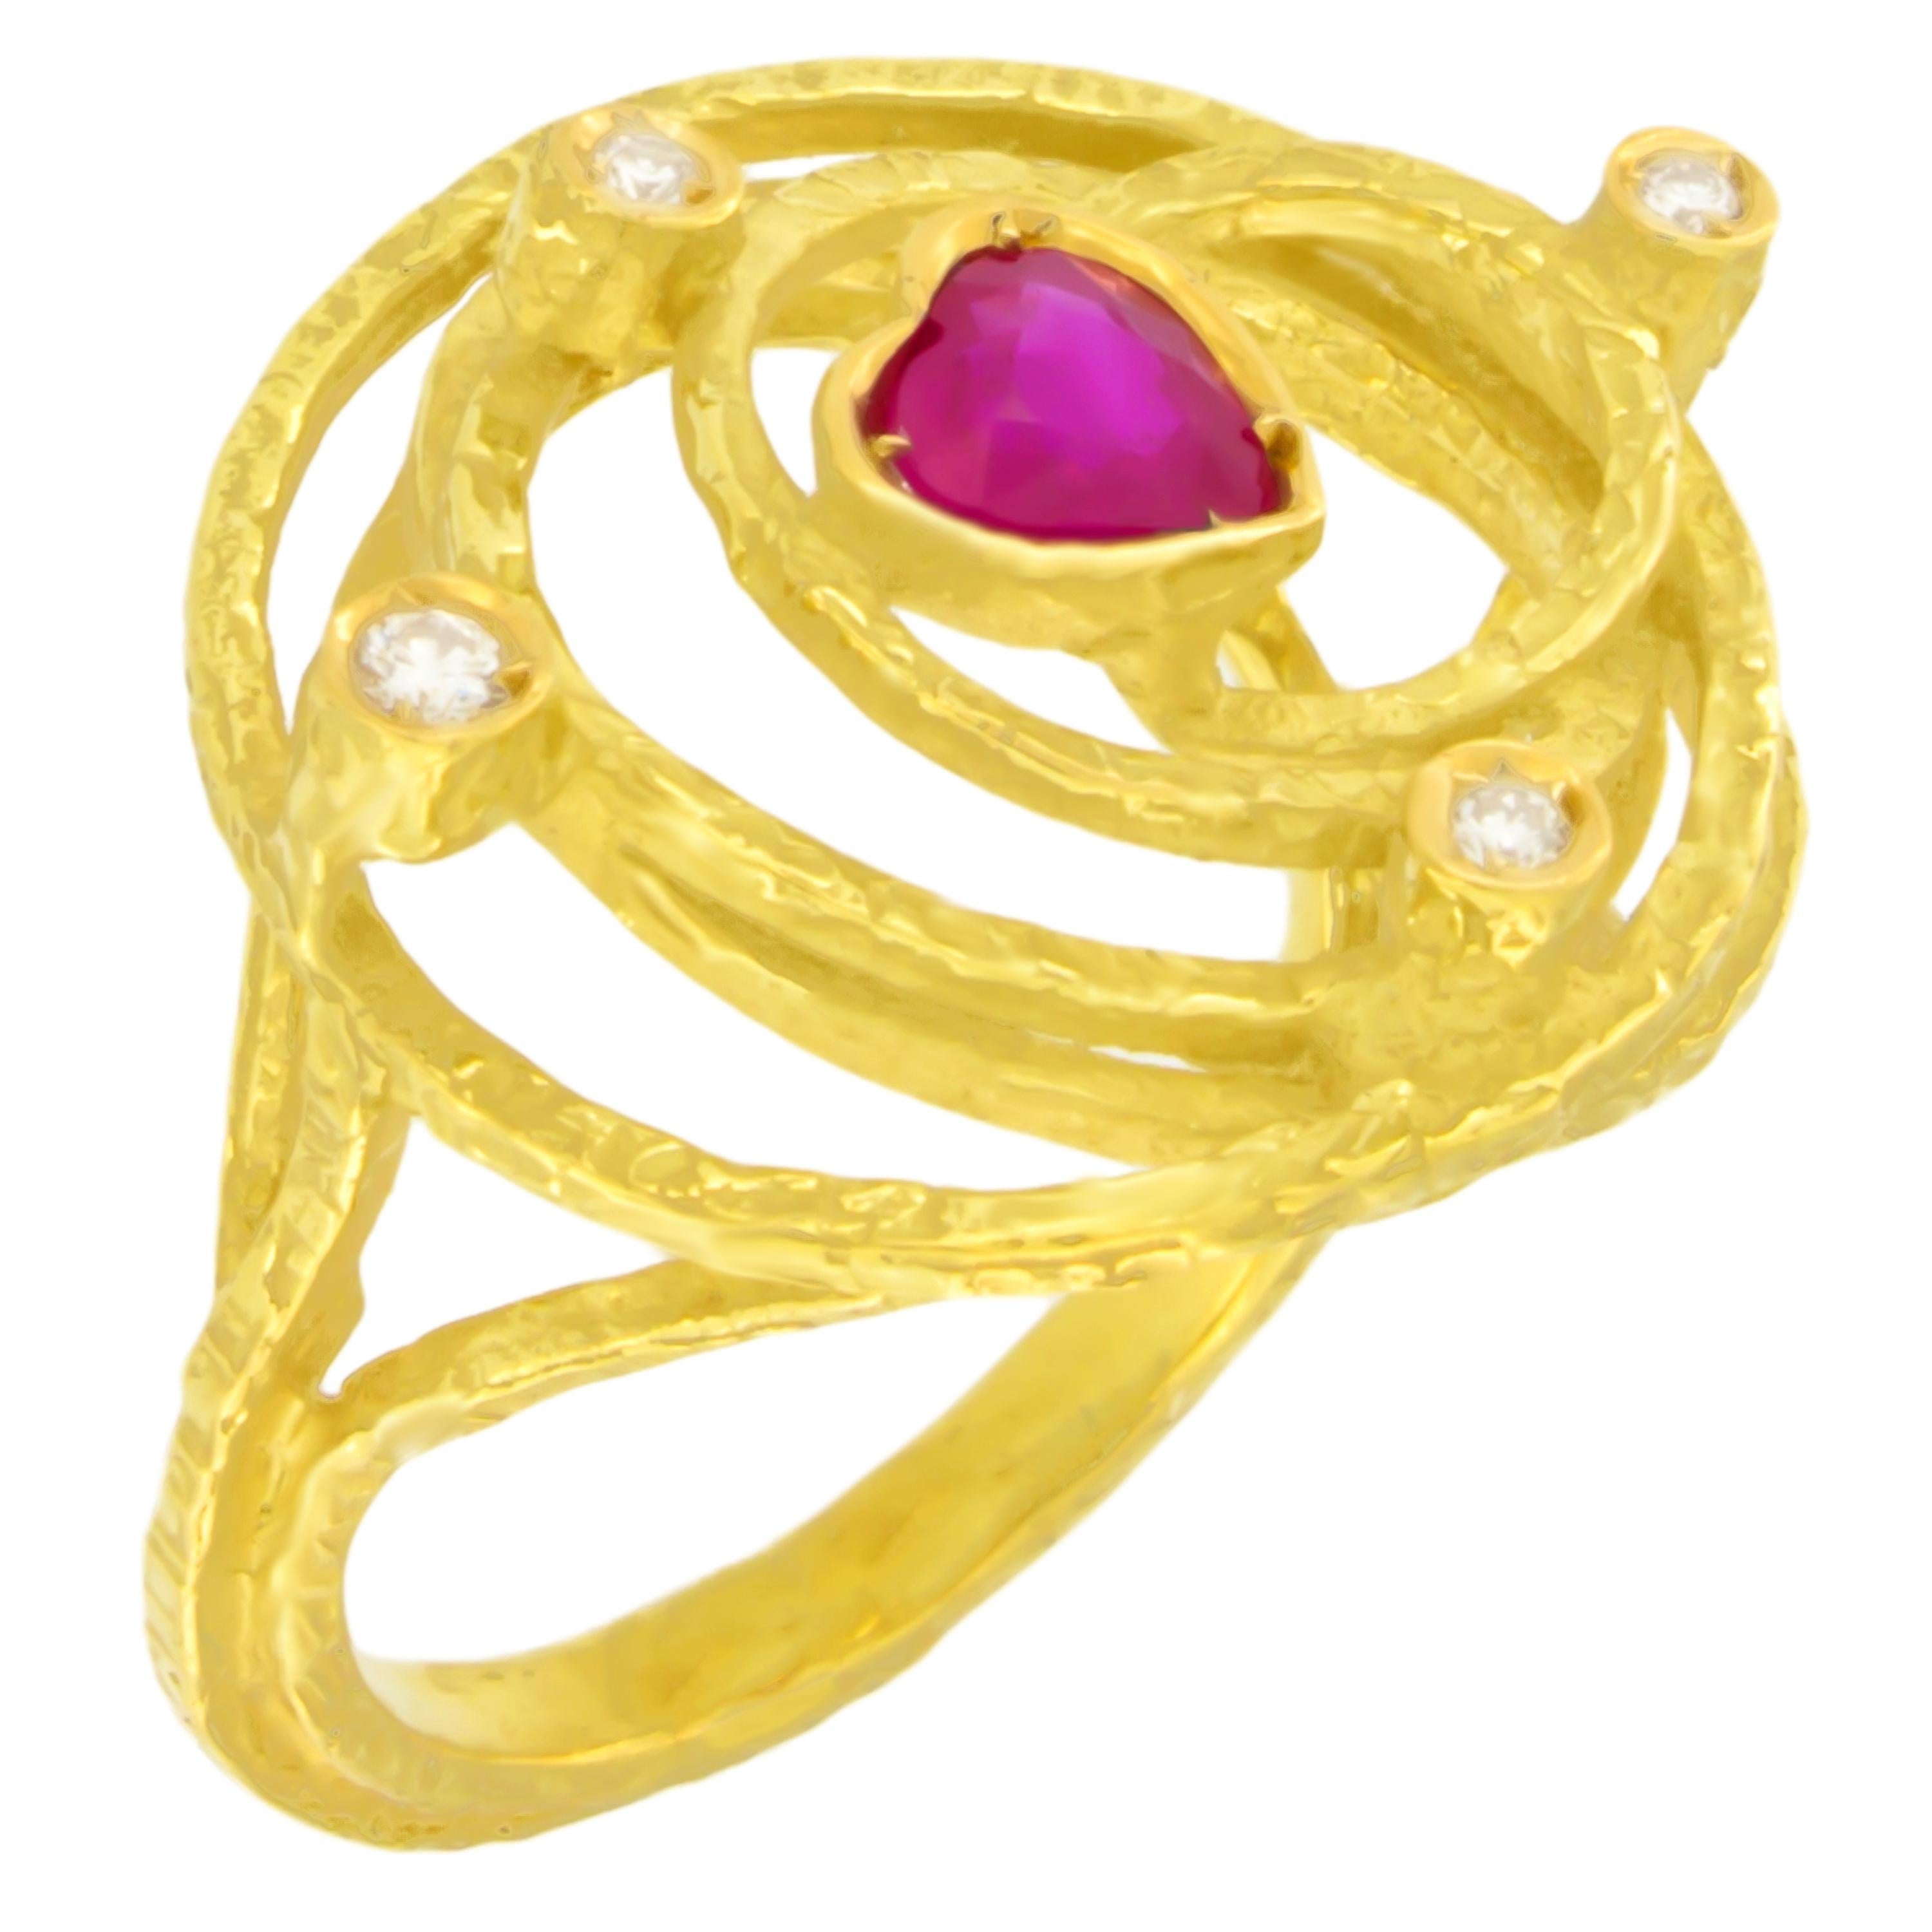 Lovely Medium Heart Ruby and Diamonds Satin Yellow Gold Cocktail Ring, from Sacchi’s Universe Collection, hand-crafted with lost-wax casting technique.

Lost-wax casting, one of the oldest techniques for creating jewelry, forms the basis of Sacchi's